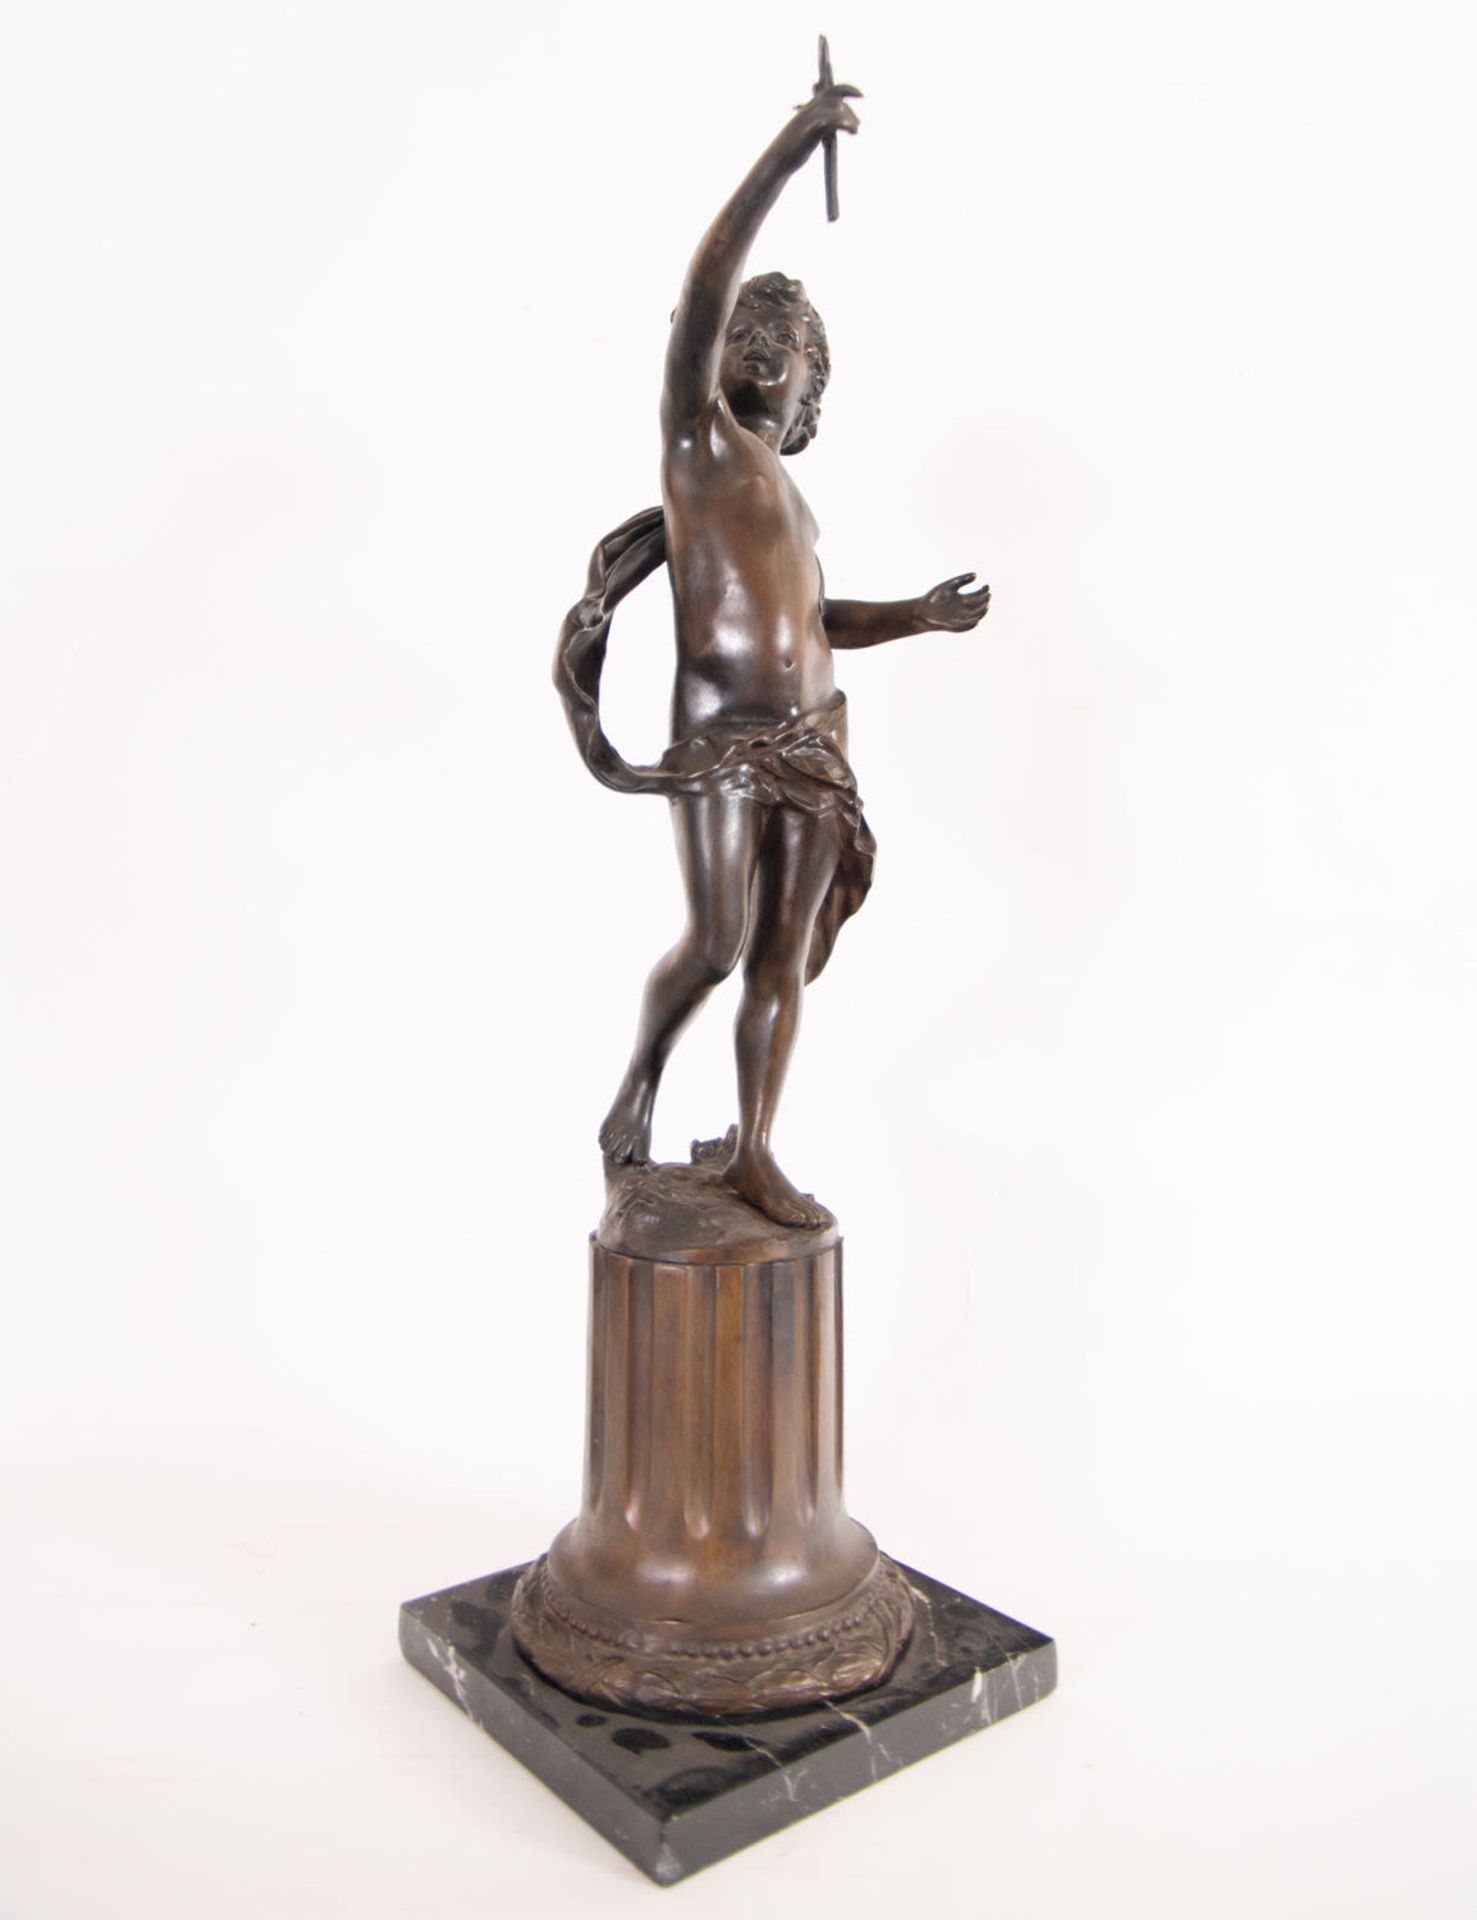 Pair of Important Cupids in Patinated Bronze, French School of the 19th Century - Image 4 of 8